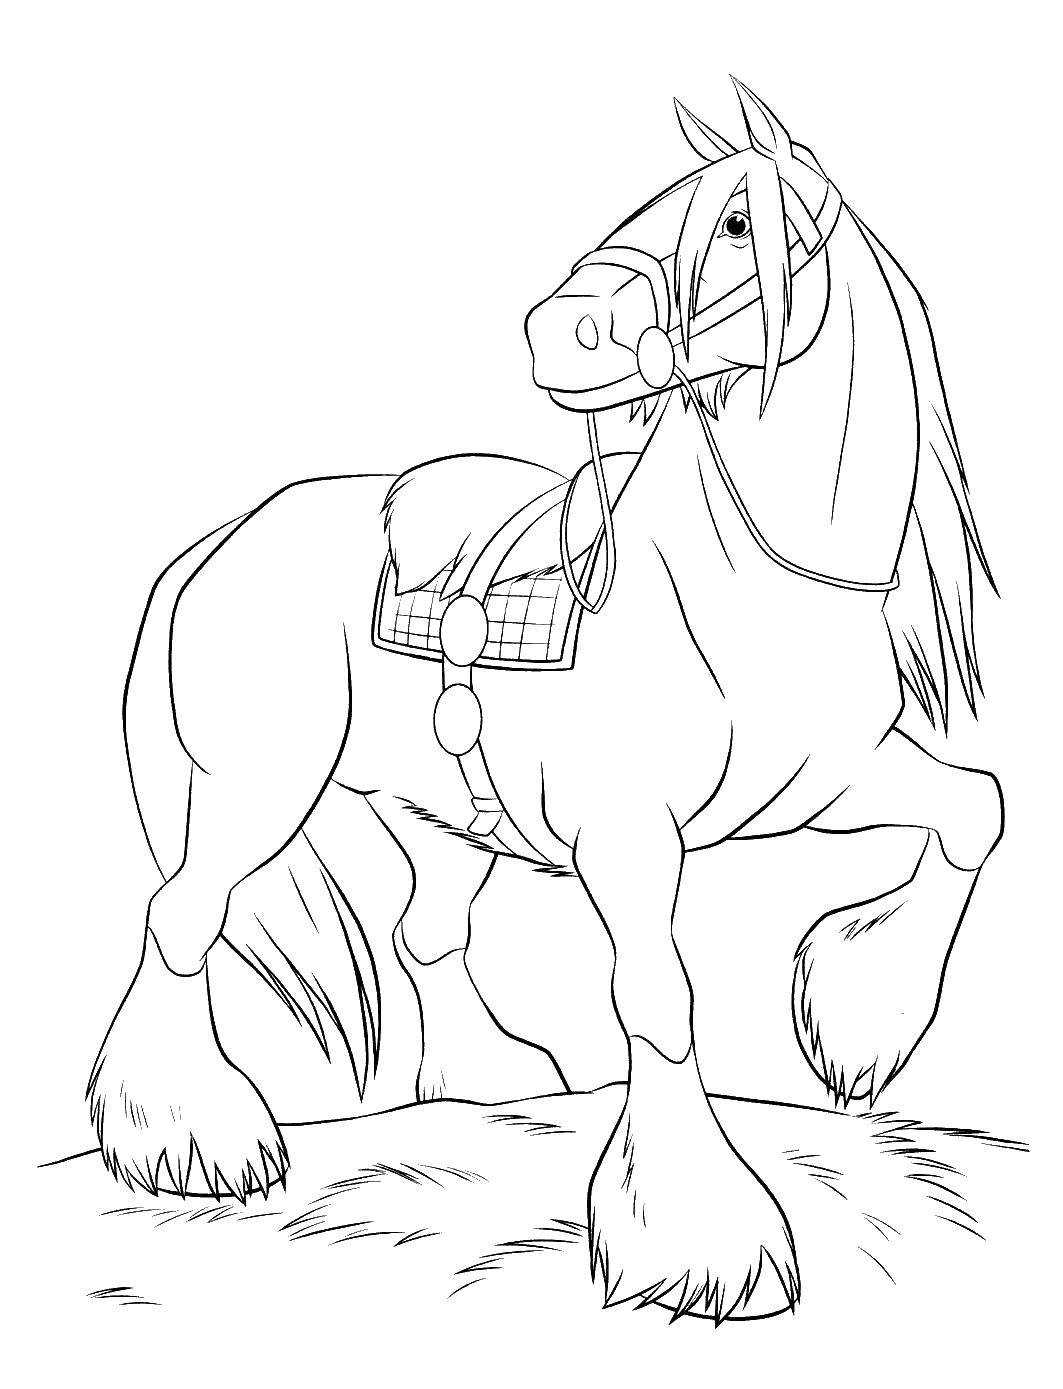 Coloring Beautiful horse. Category brave heart. Tags:  Cartoon character.